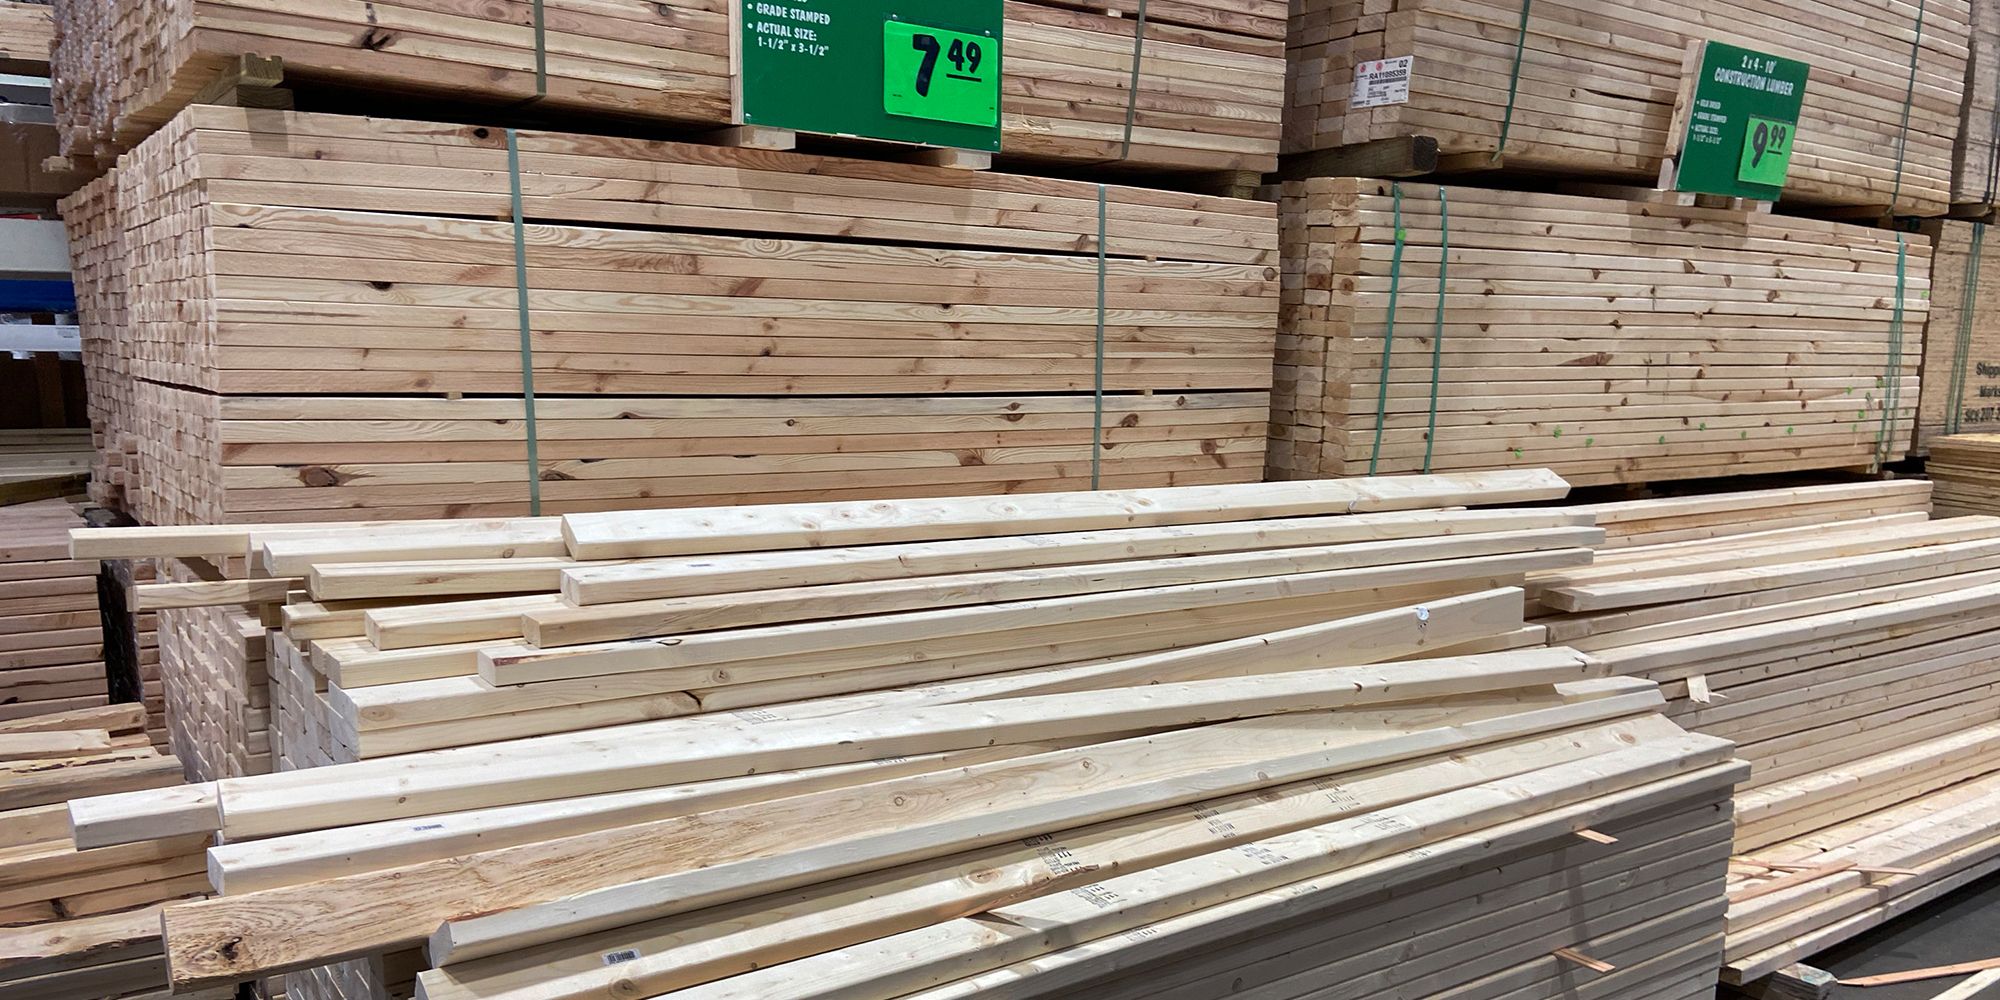 Lumber Prices 21 Why Is There A Shortage Why Is It Expensive